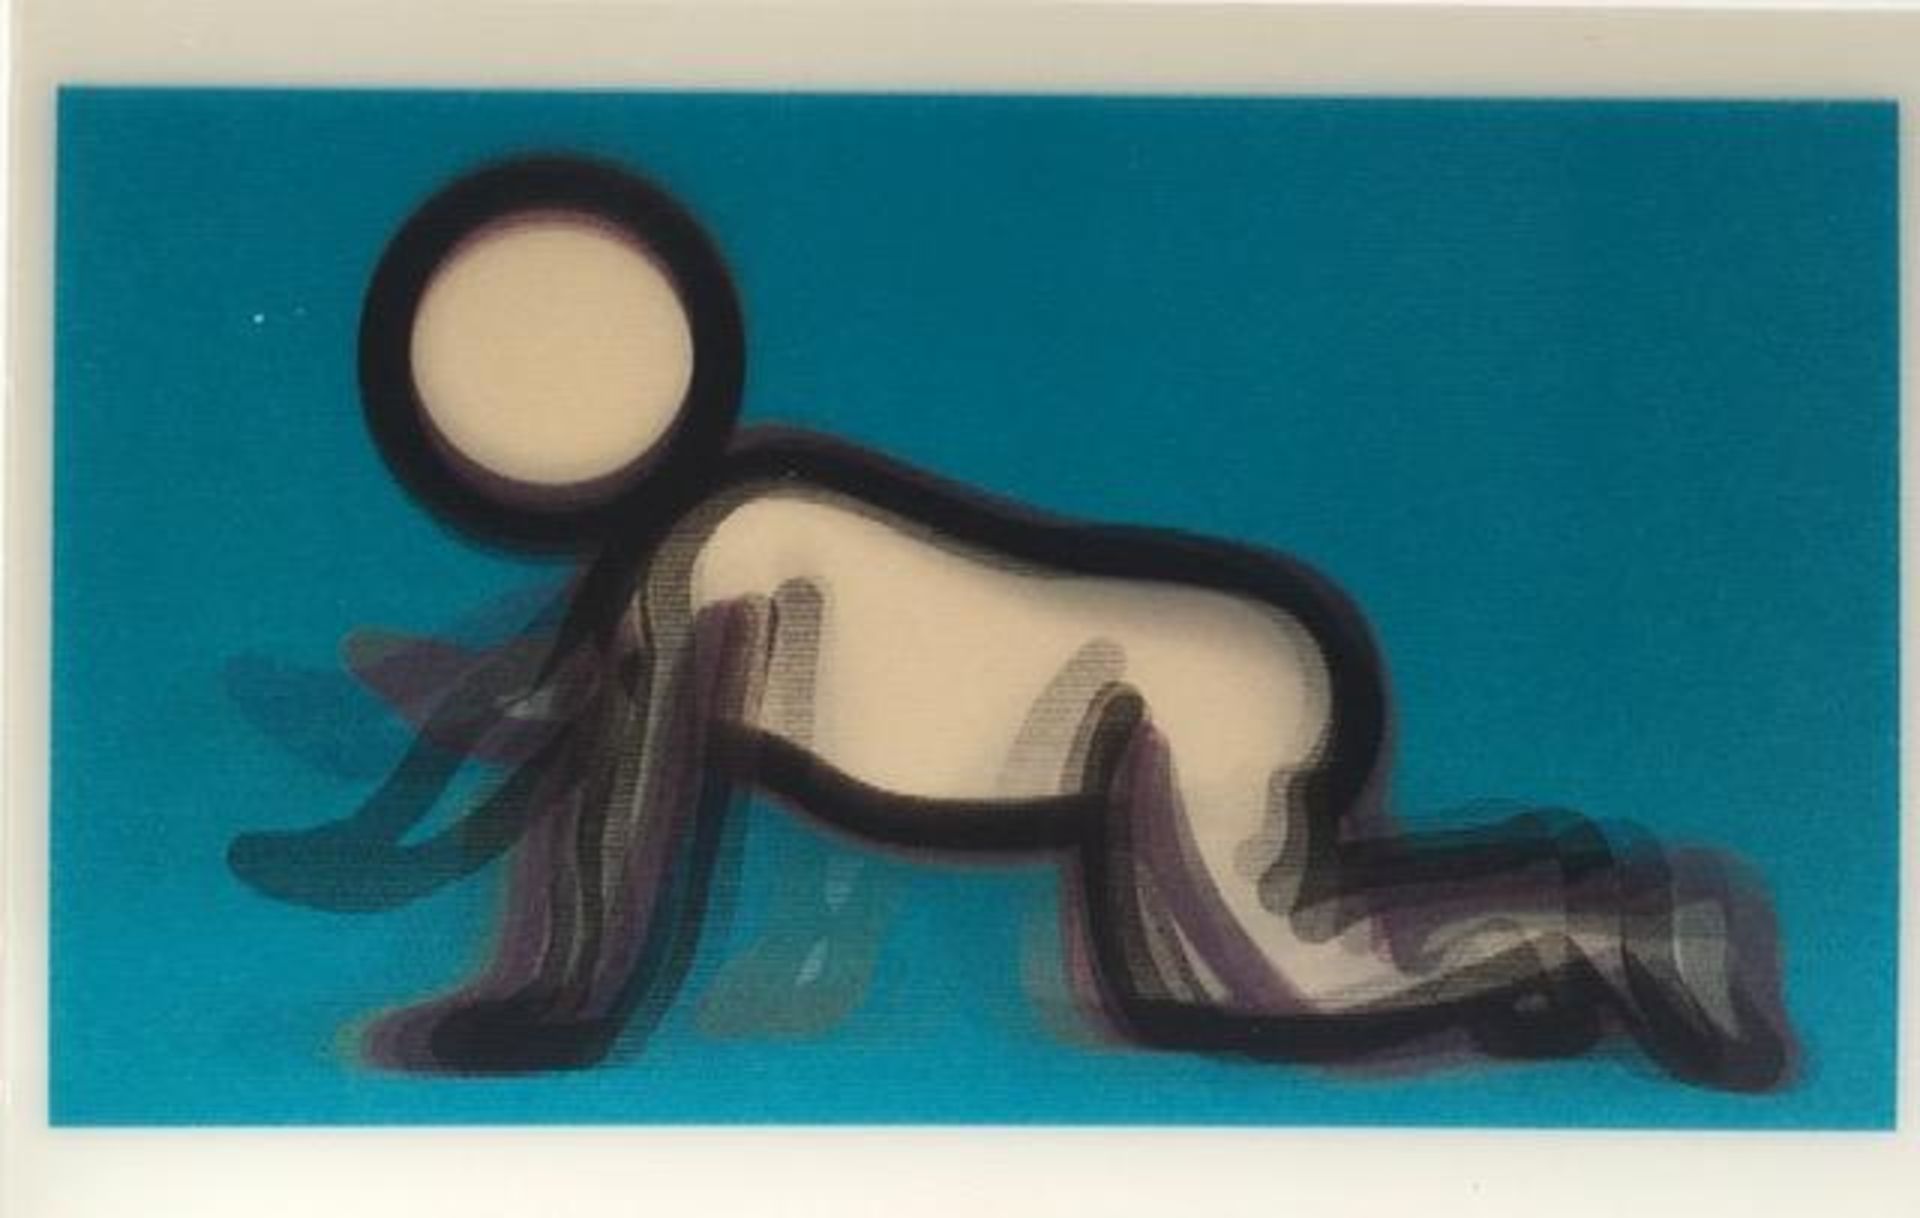 Julian Opie (1958-) 3D Lenticular Moving Image, in Colours ‘DINO CRAWLING’ Framed, 2012 - Image 5 of 13